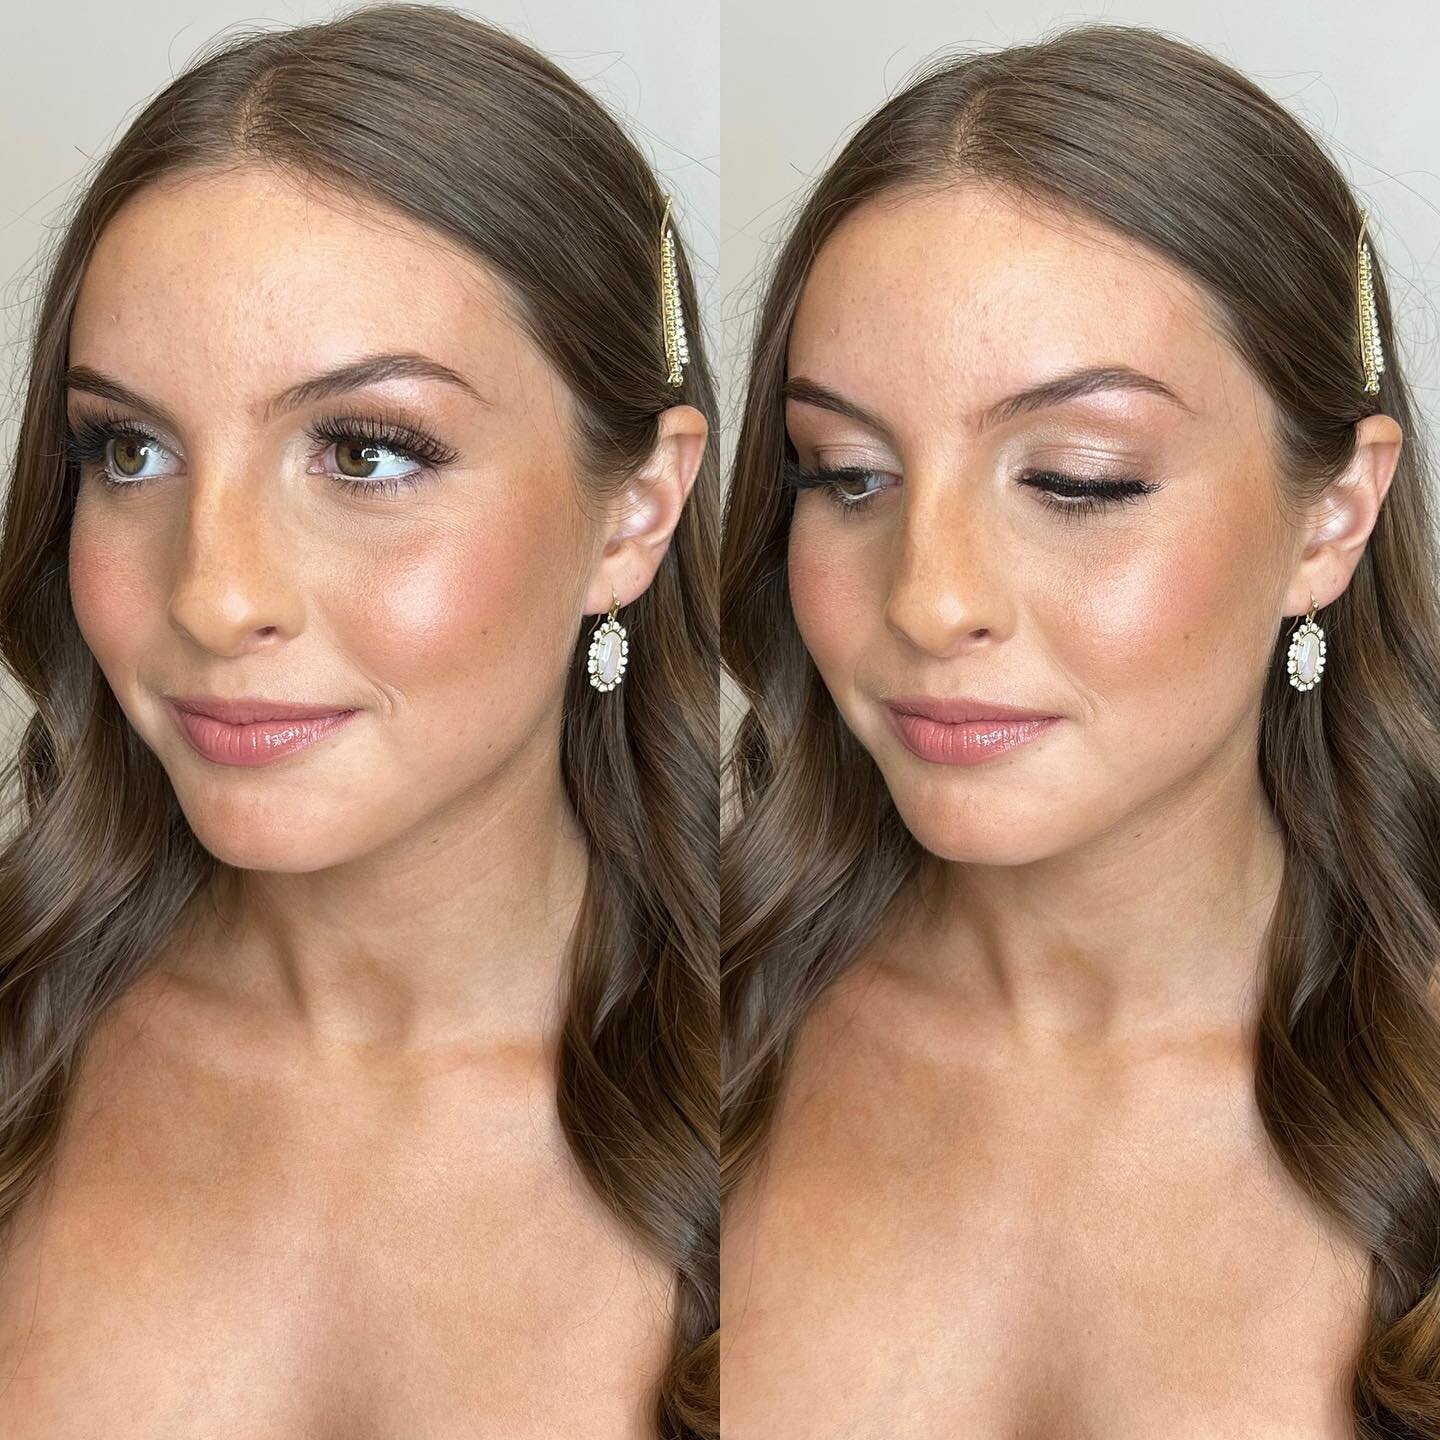 girl your glowing! 
Makeup &amp; Spraytan by Stephanie 
Hair by @hairbywhitneyc 

#parlourbeaute #prom #prom2022 #prommakeup #spraytan #buffalomua #buffalomakeupartist #wnysalon #noedit #nofilter #glo